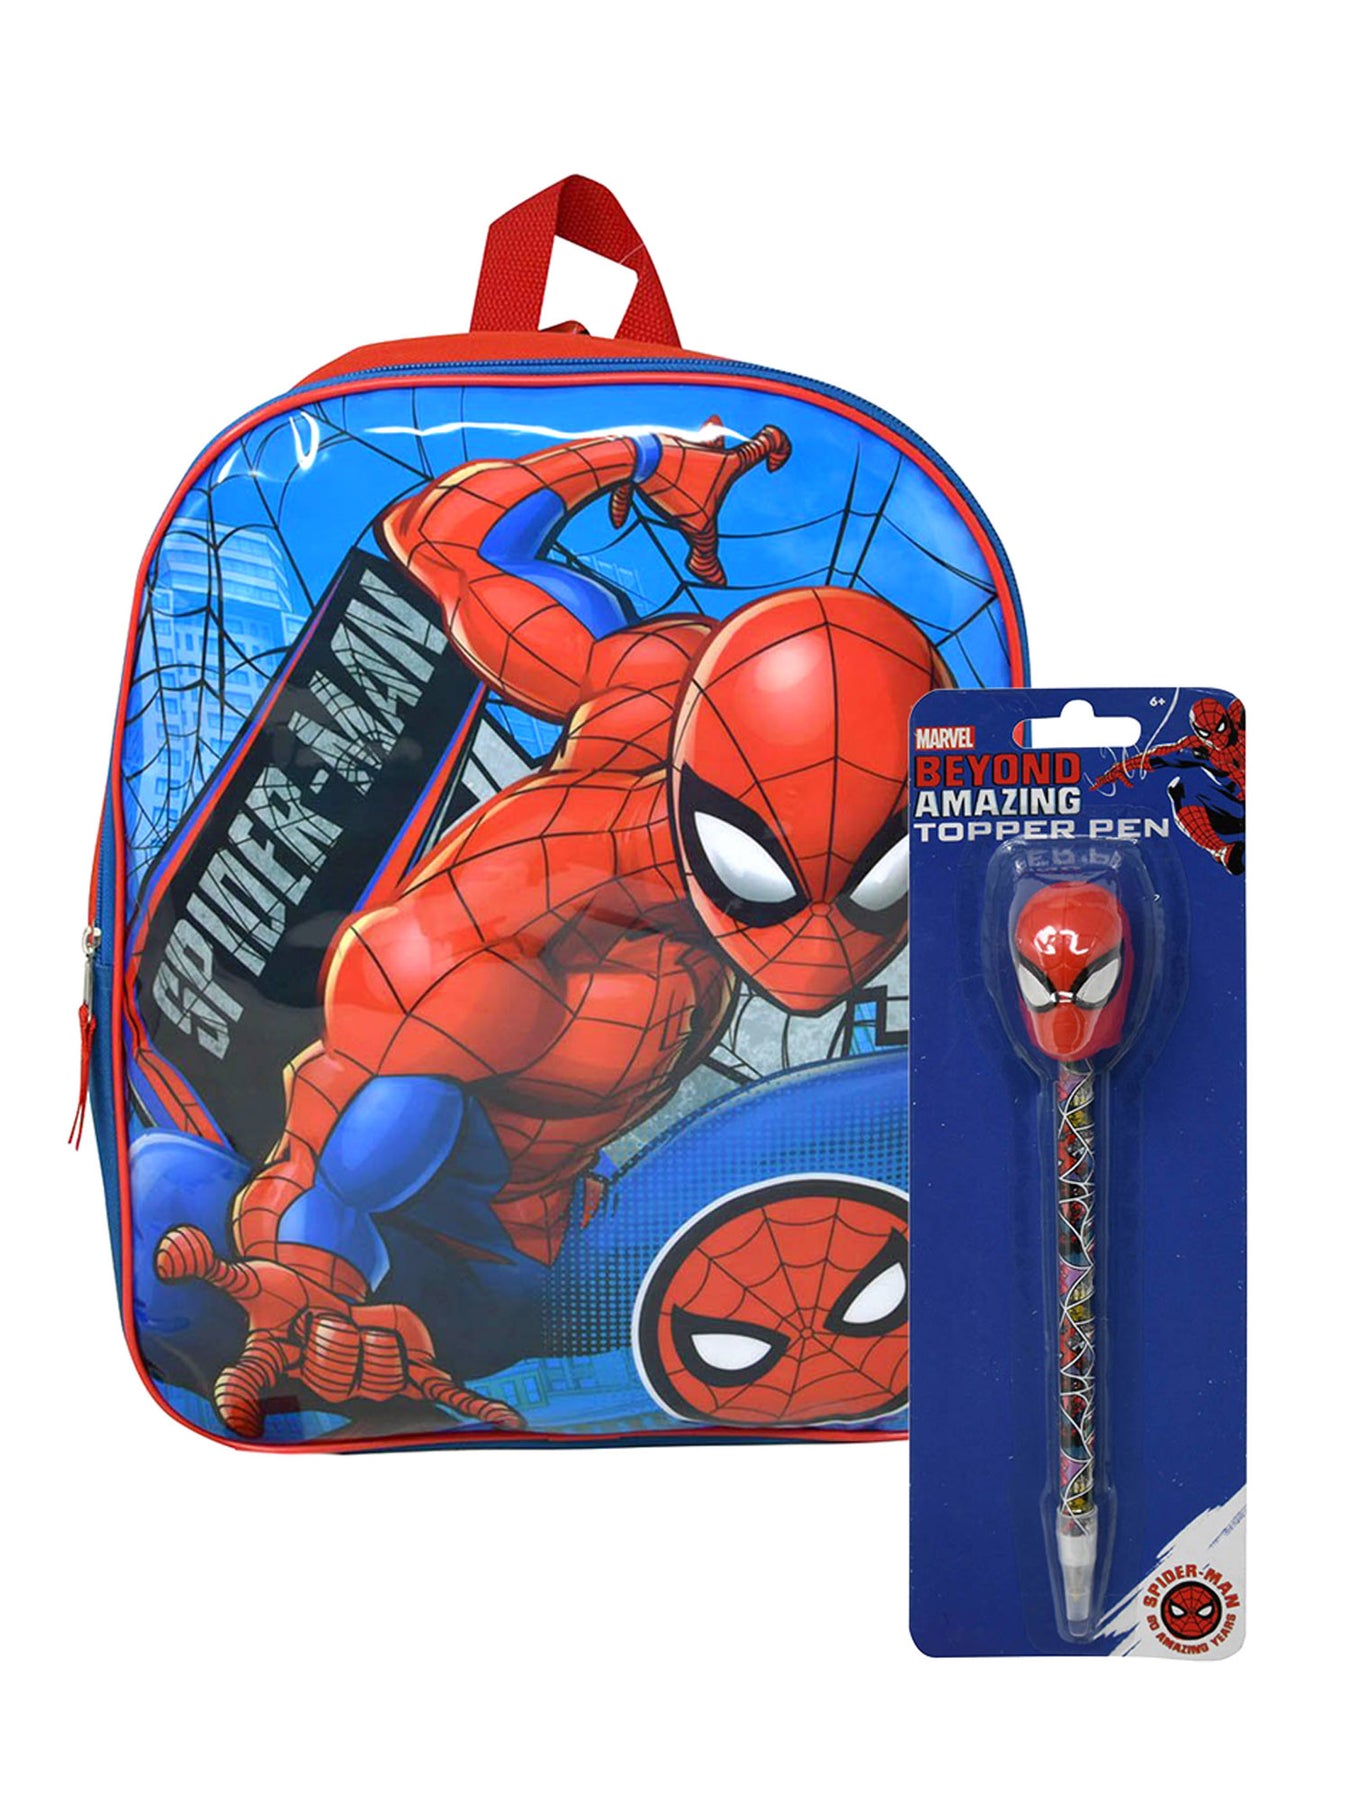 Marvel Spider-Man 15 Backpack w/ Amazing Spiderman Pen Topper Set – Open  and Clothing